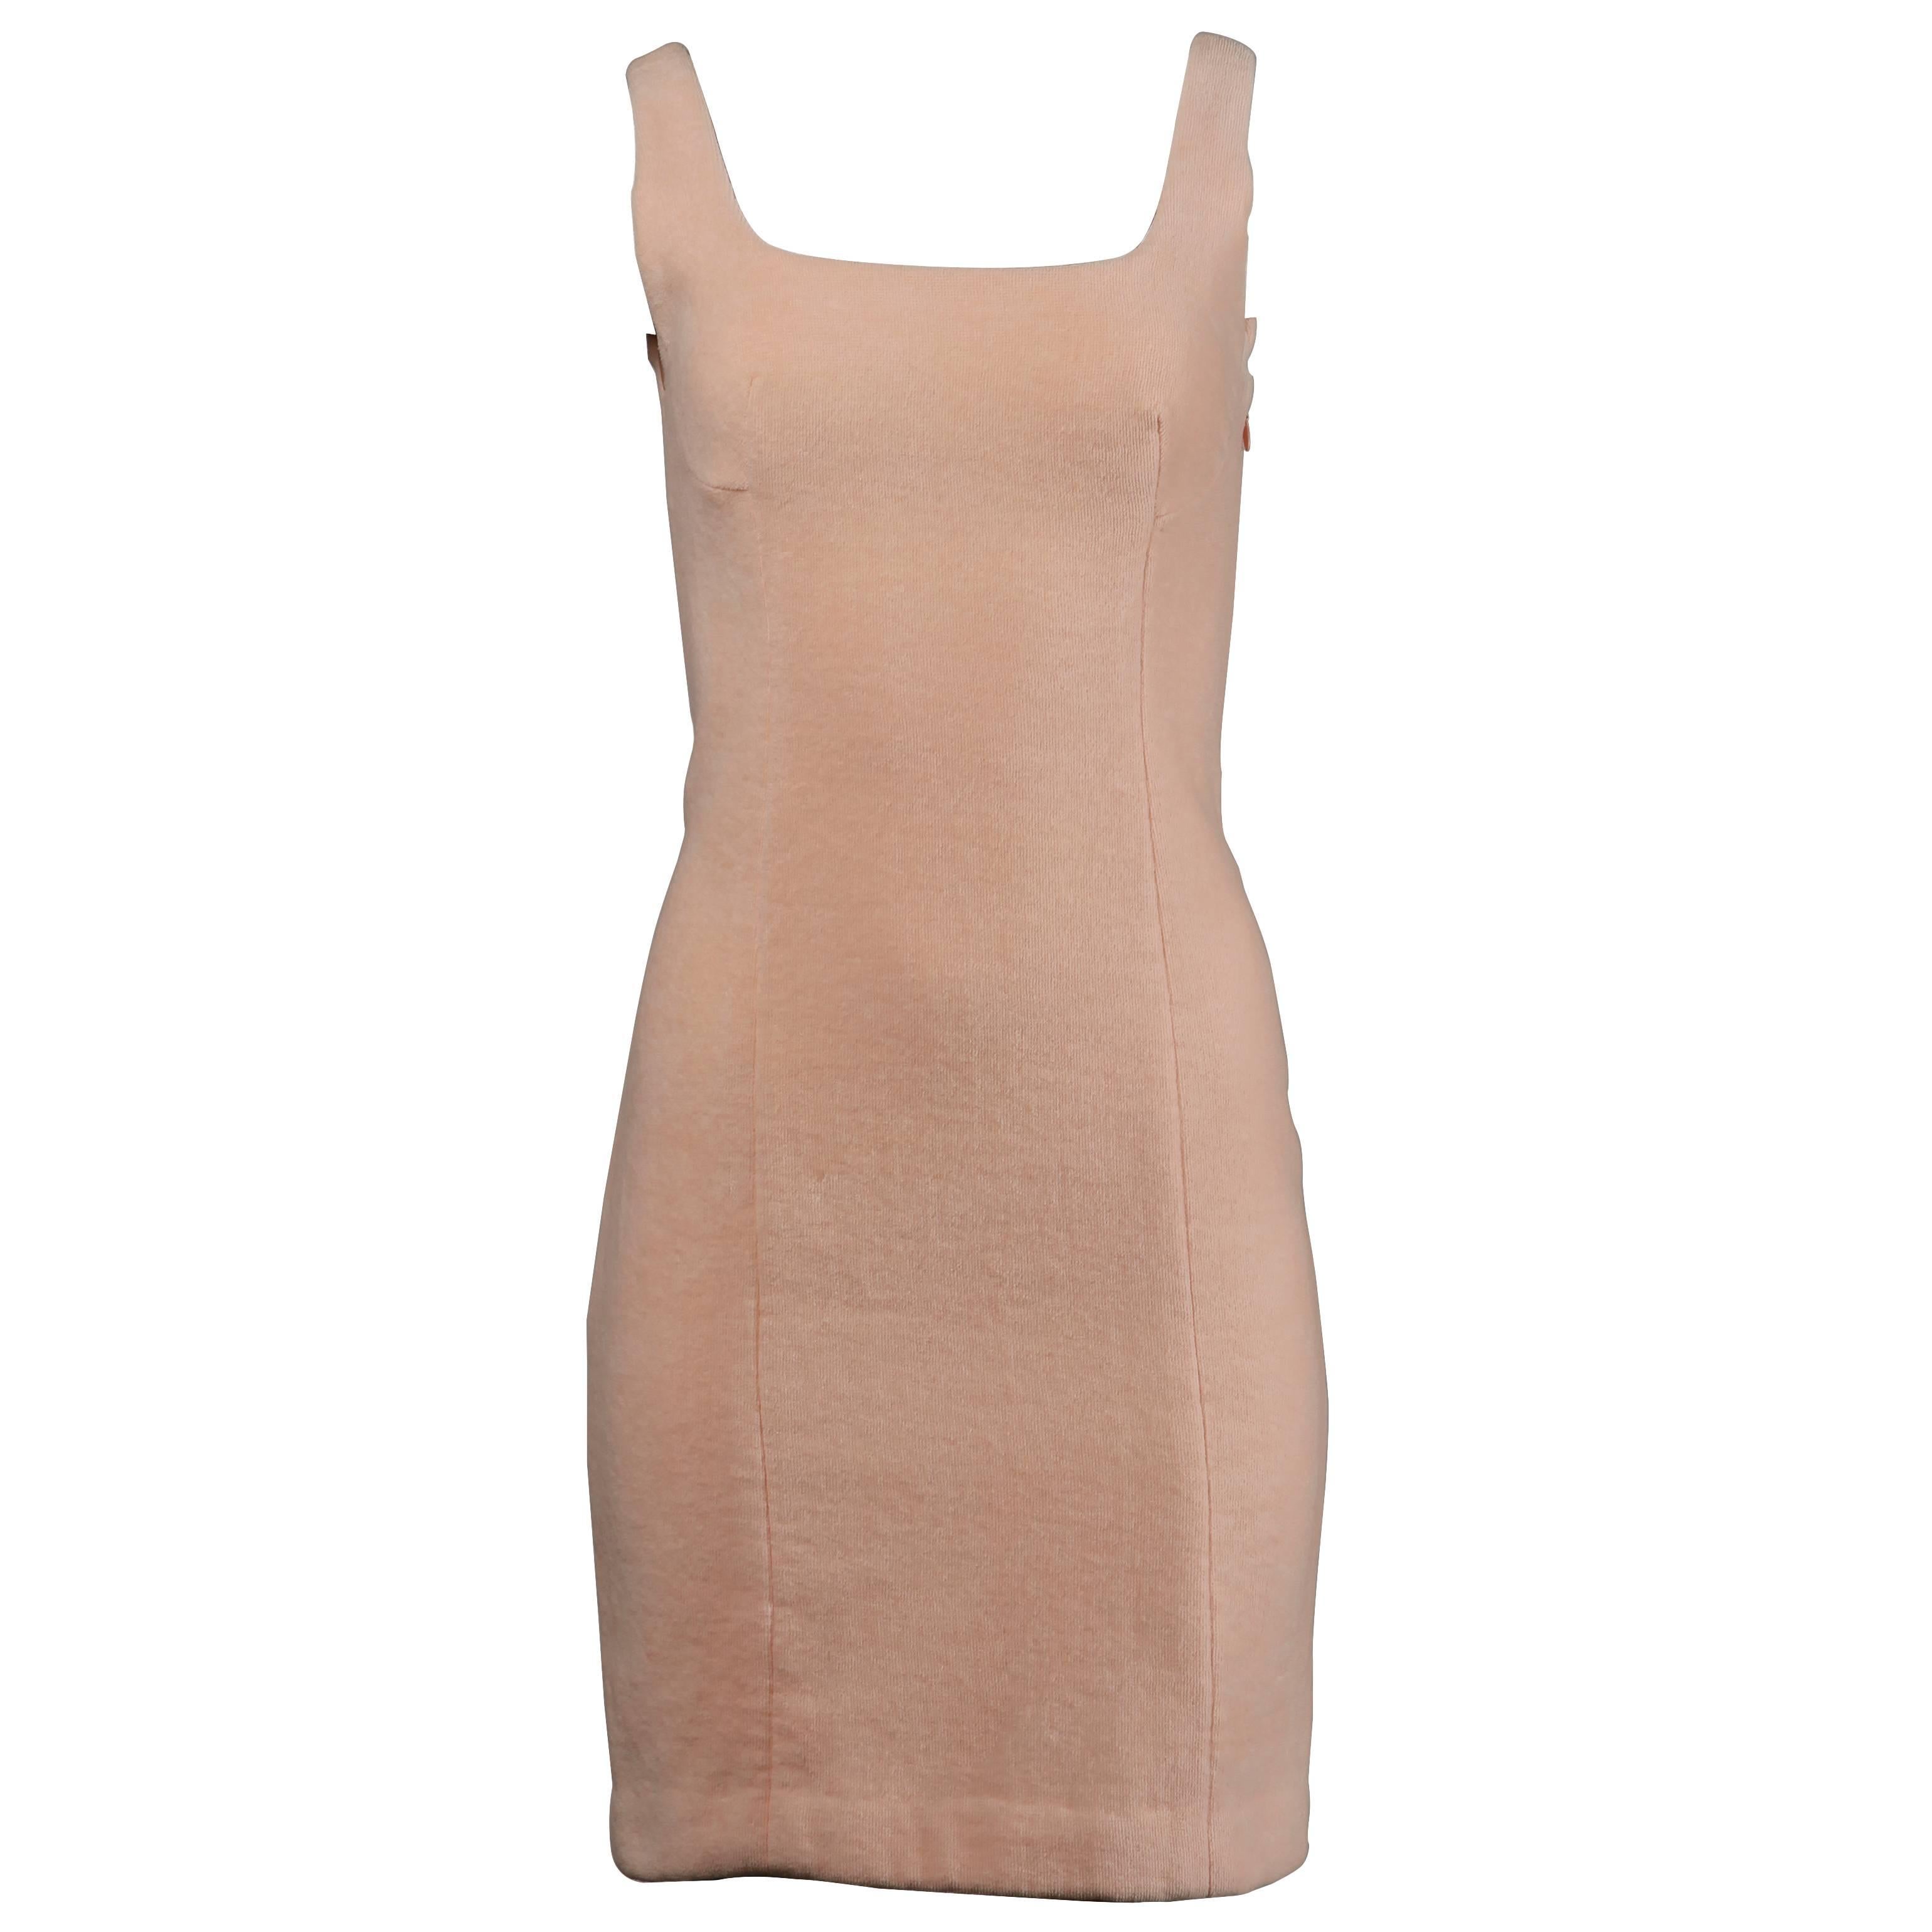 Gianni Versace Couture Vintage 1990s Pale Pink Chenille Body Con Dress For Sale